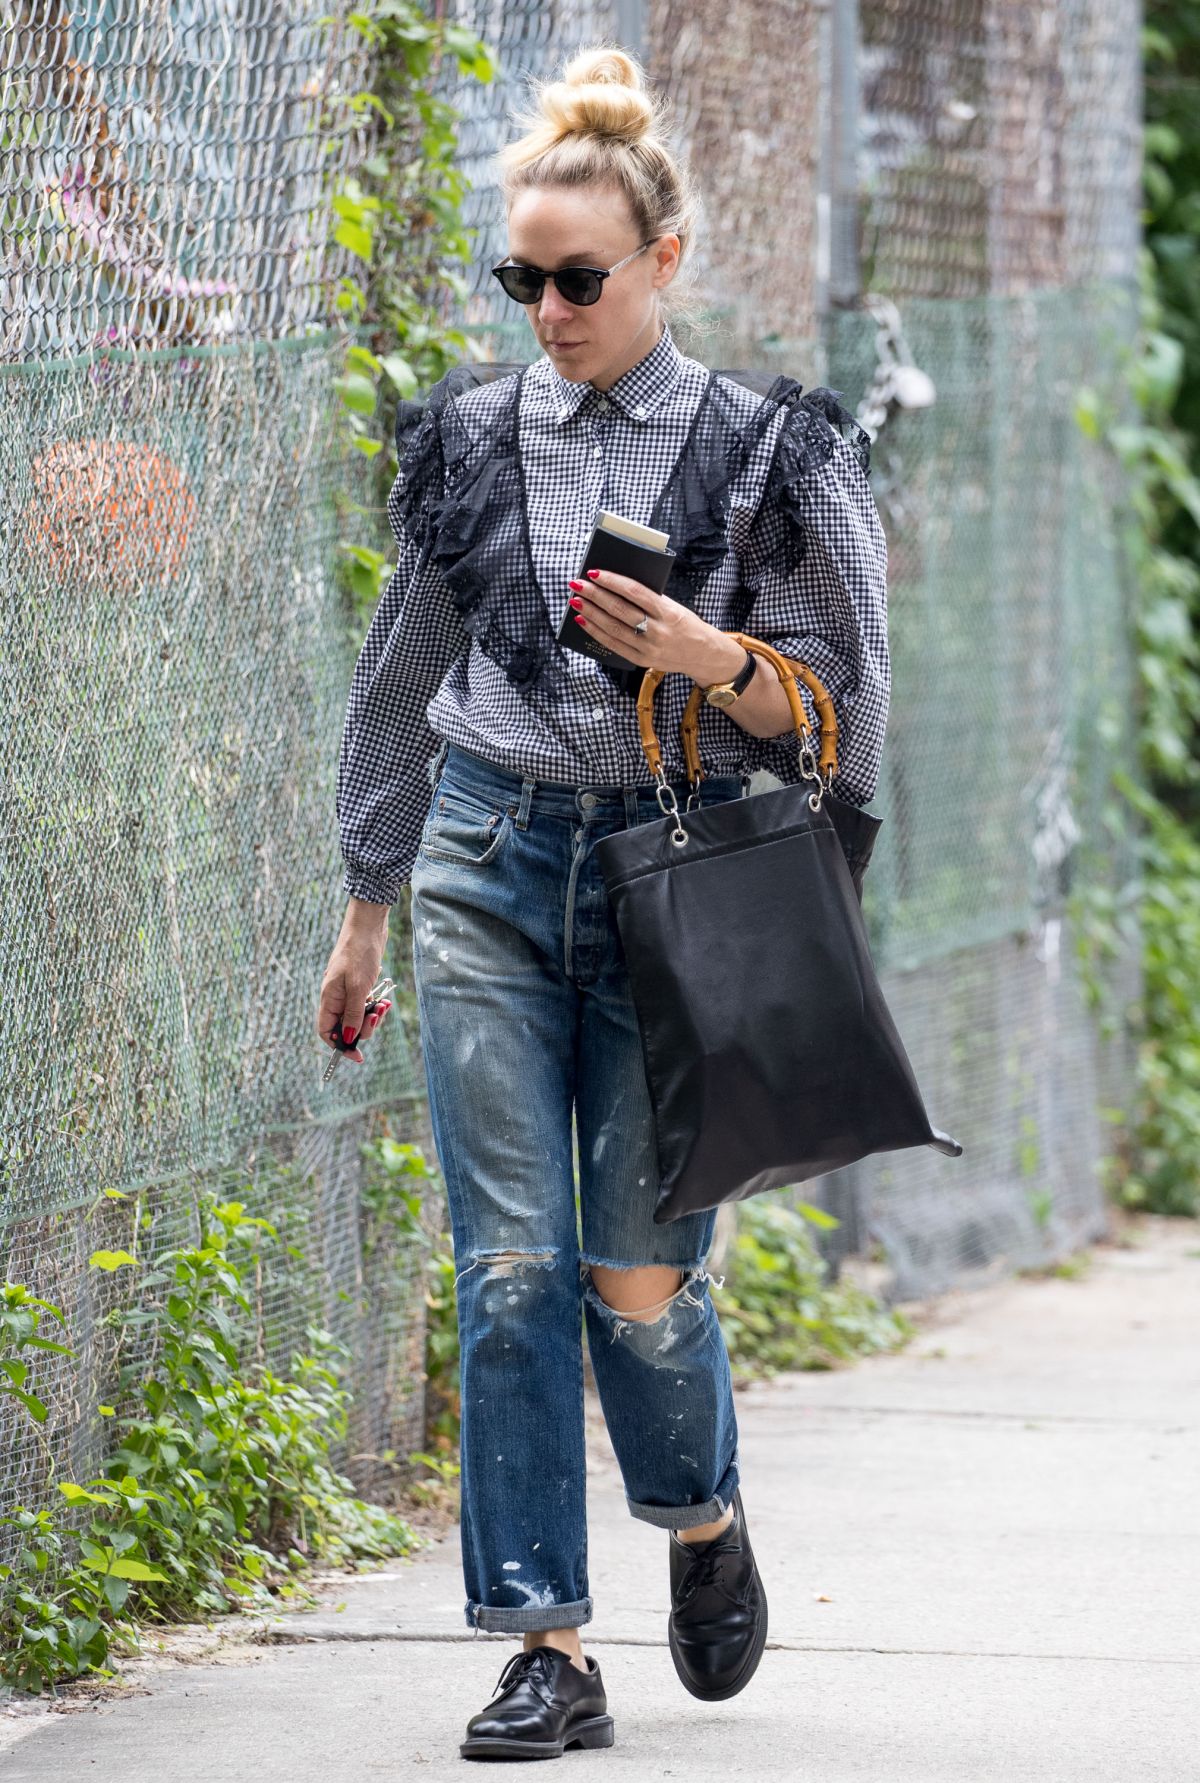 CHLOE SEVIGNY Out and About in New York 06/09/2017 – HawtCelebs